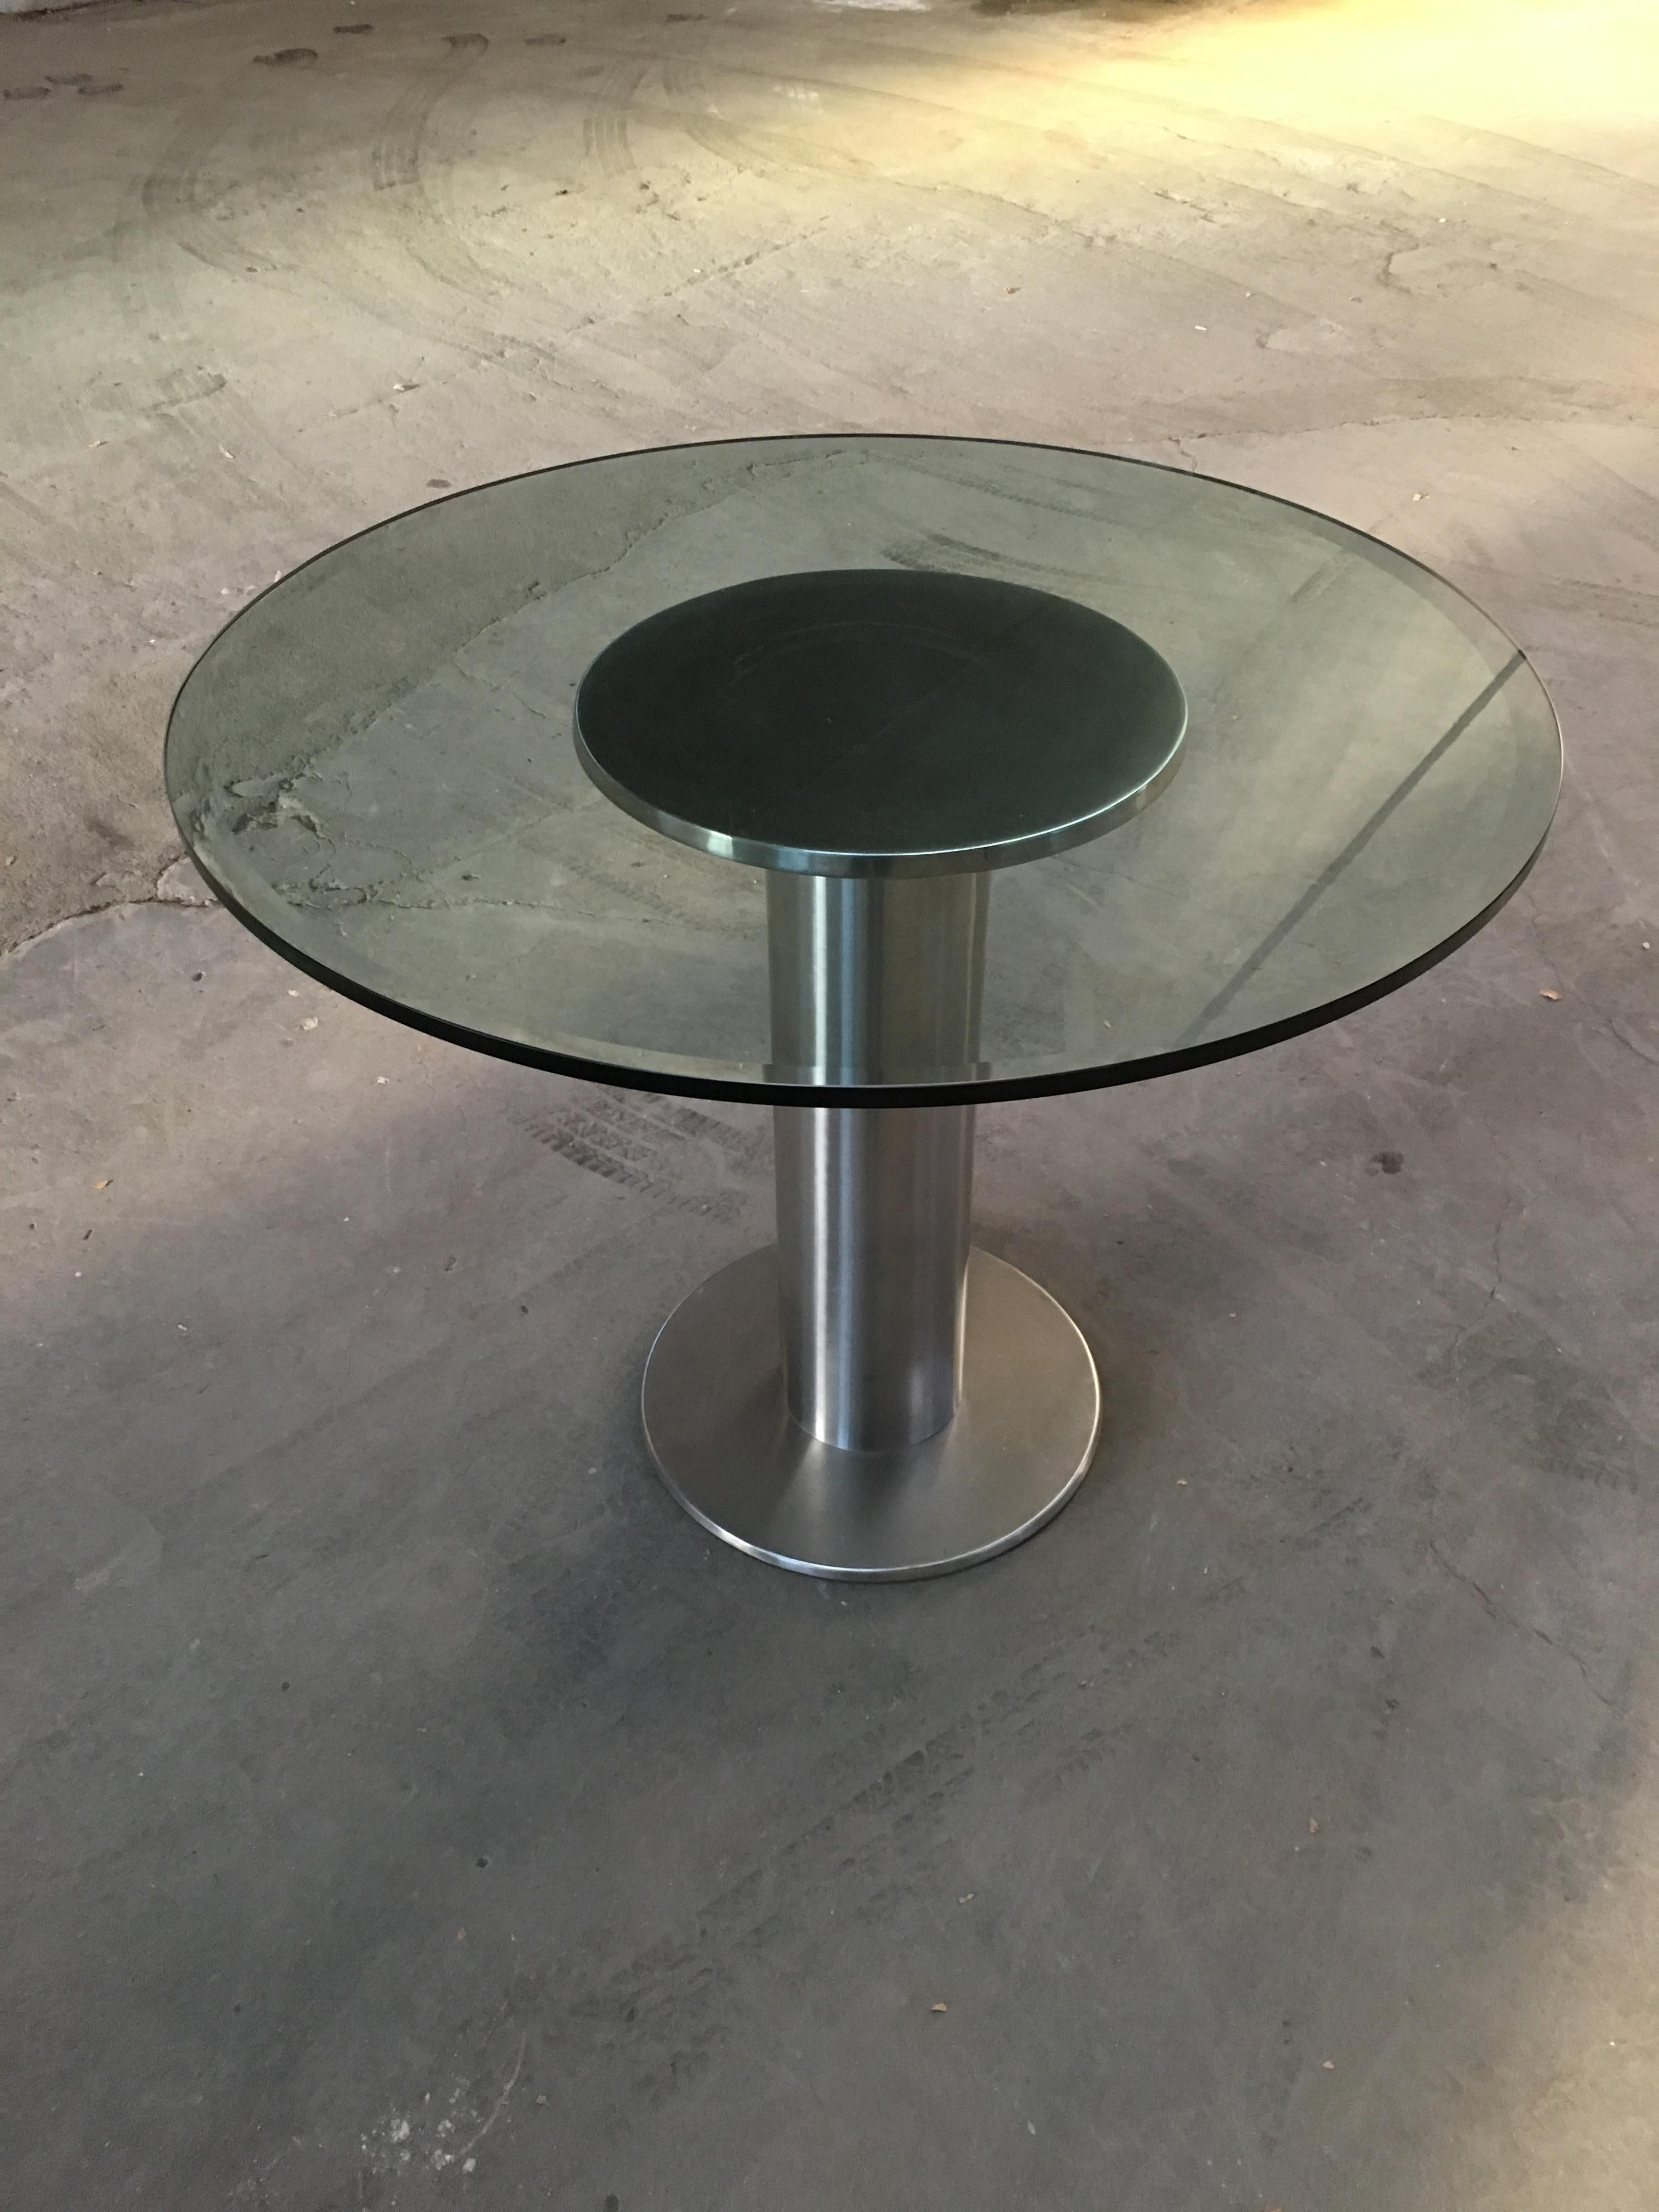 Late 20th Century Mid-Century Modern Italian Chrome Dining or Center Table with Glass Top, 1970s